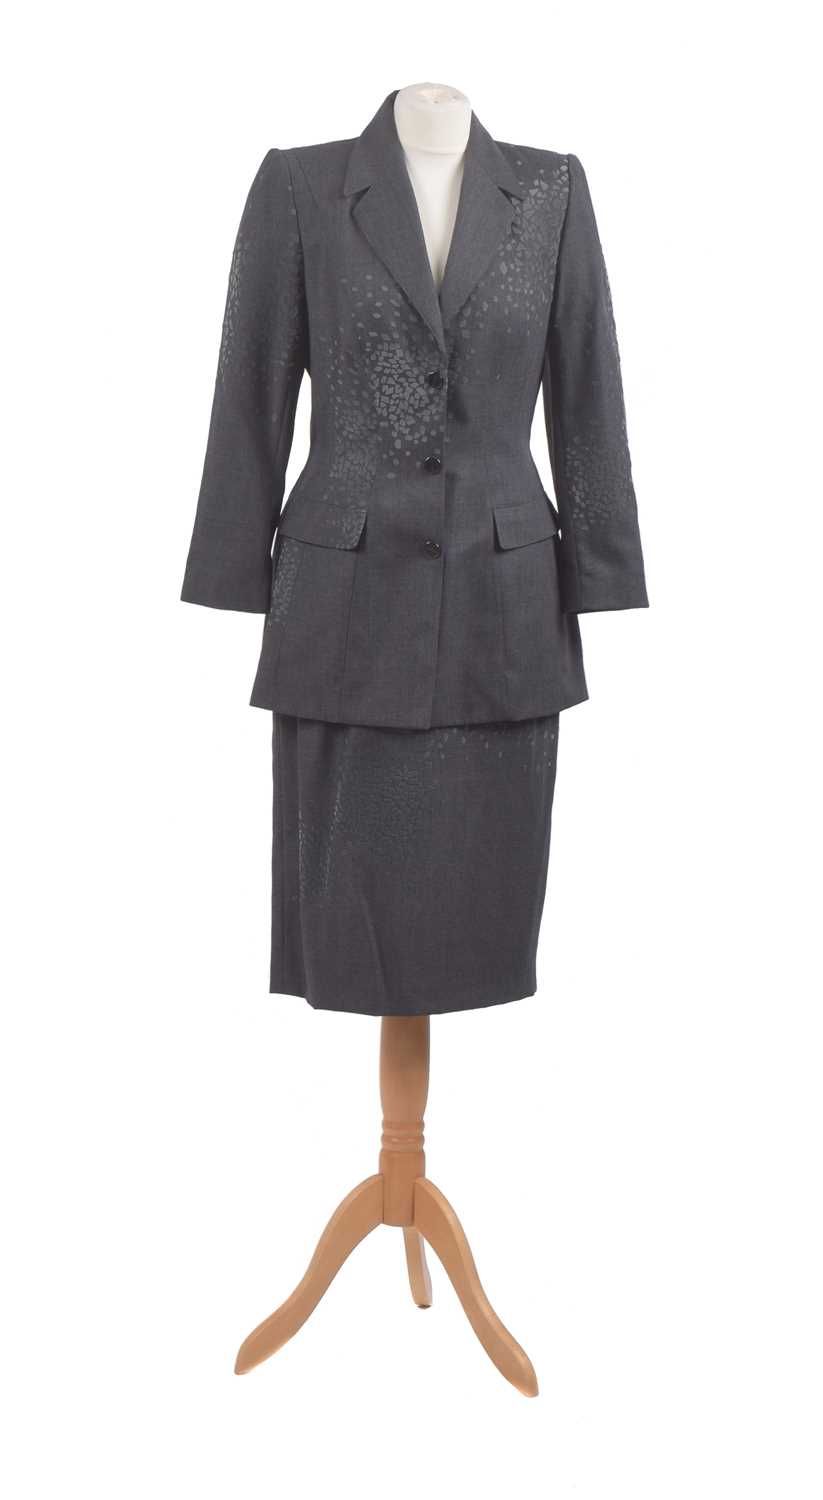 Lot 110 - A two-piece suit by Mugler